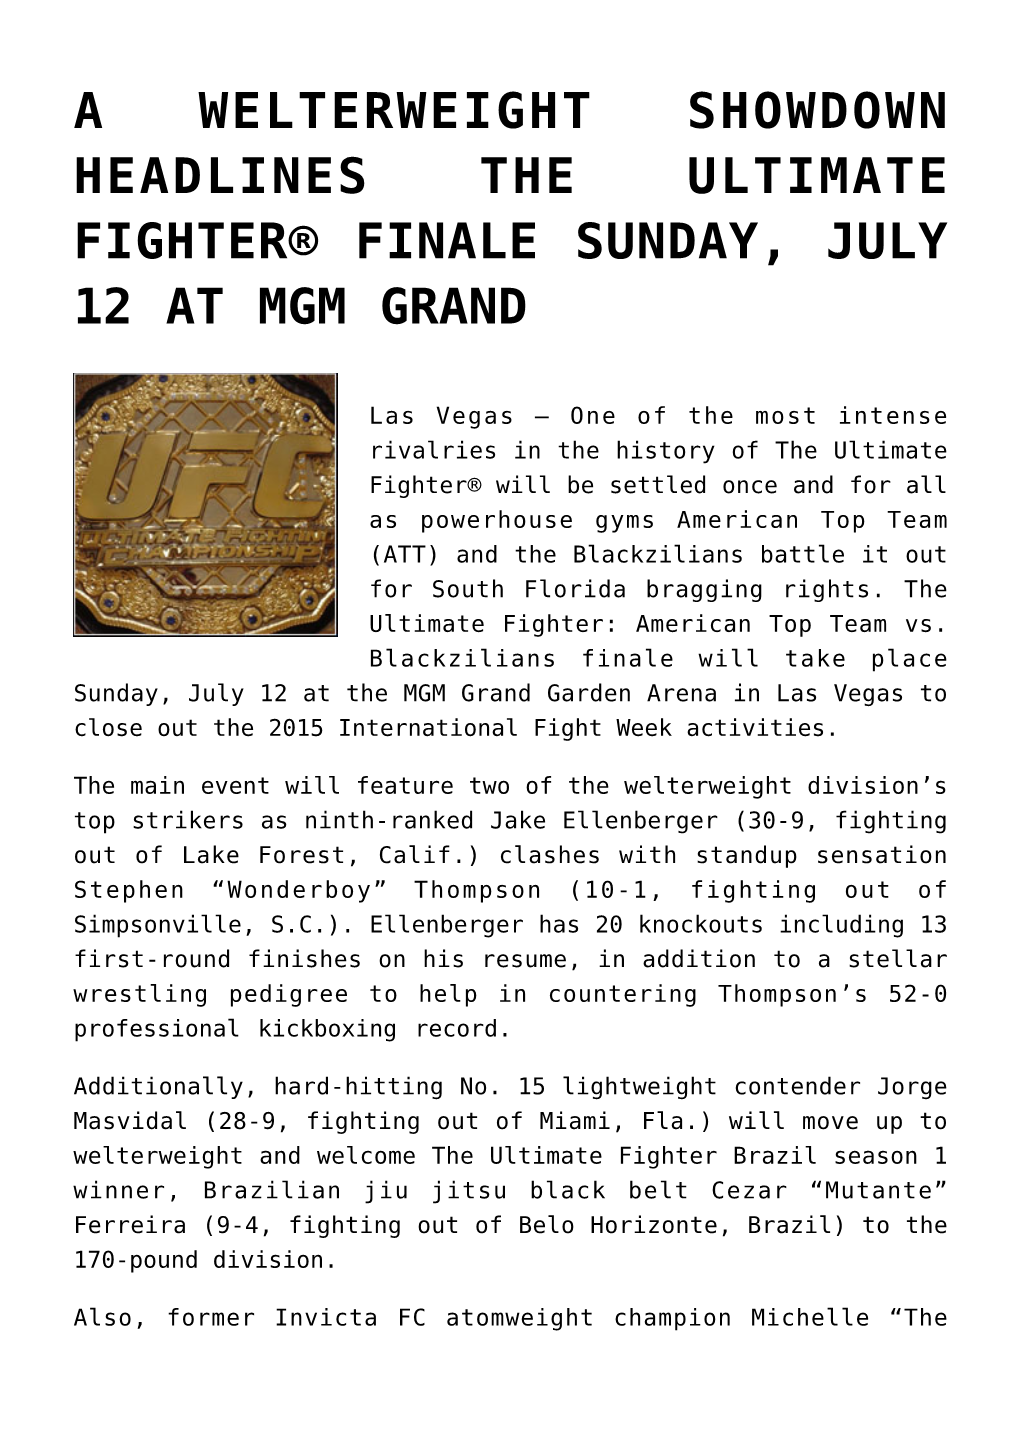 A Welterweight Showdown Headlines the Ultimate Fighter® Finale Sunday, July 12 at Mgm Grand